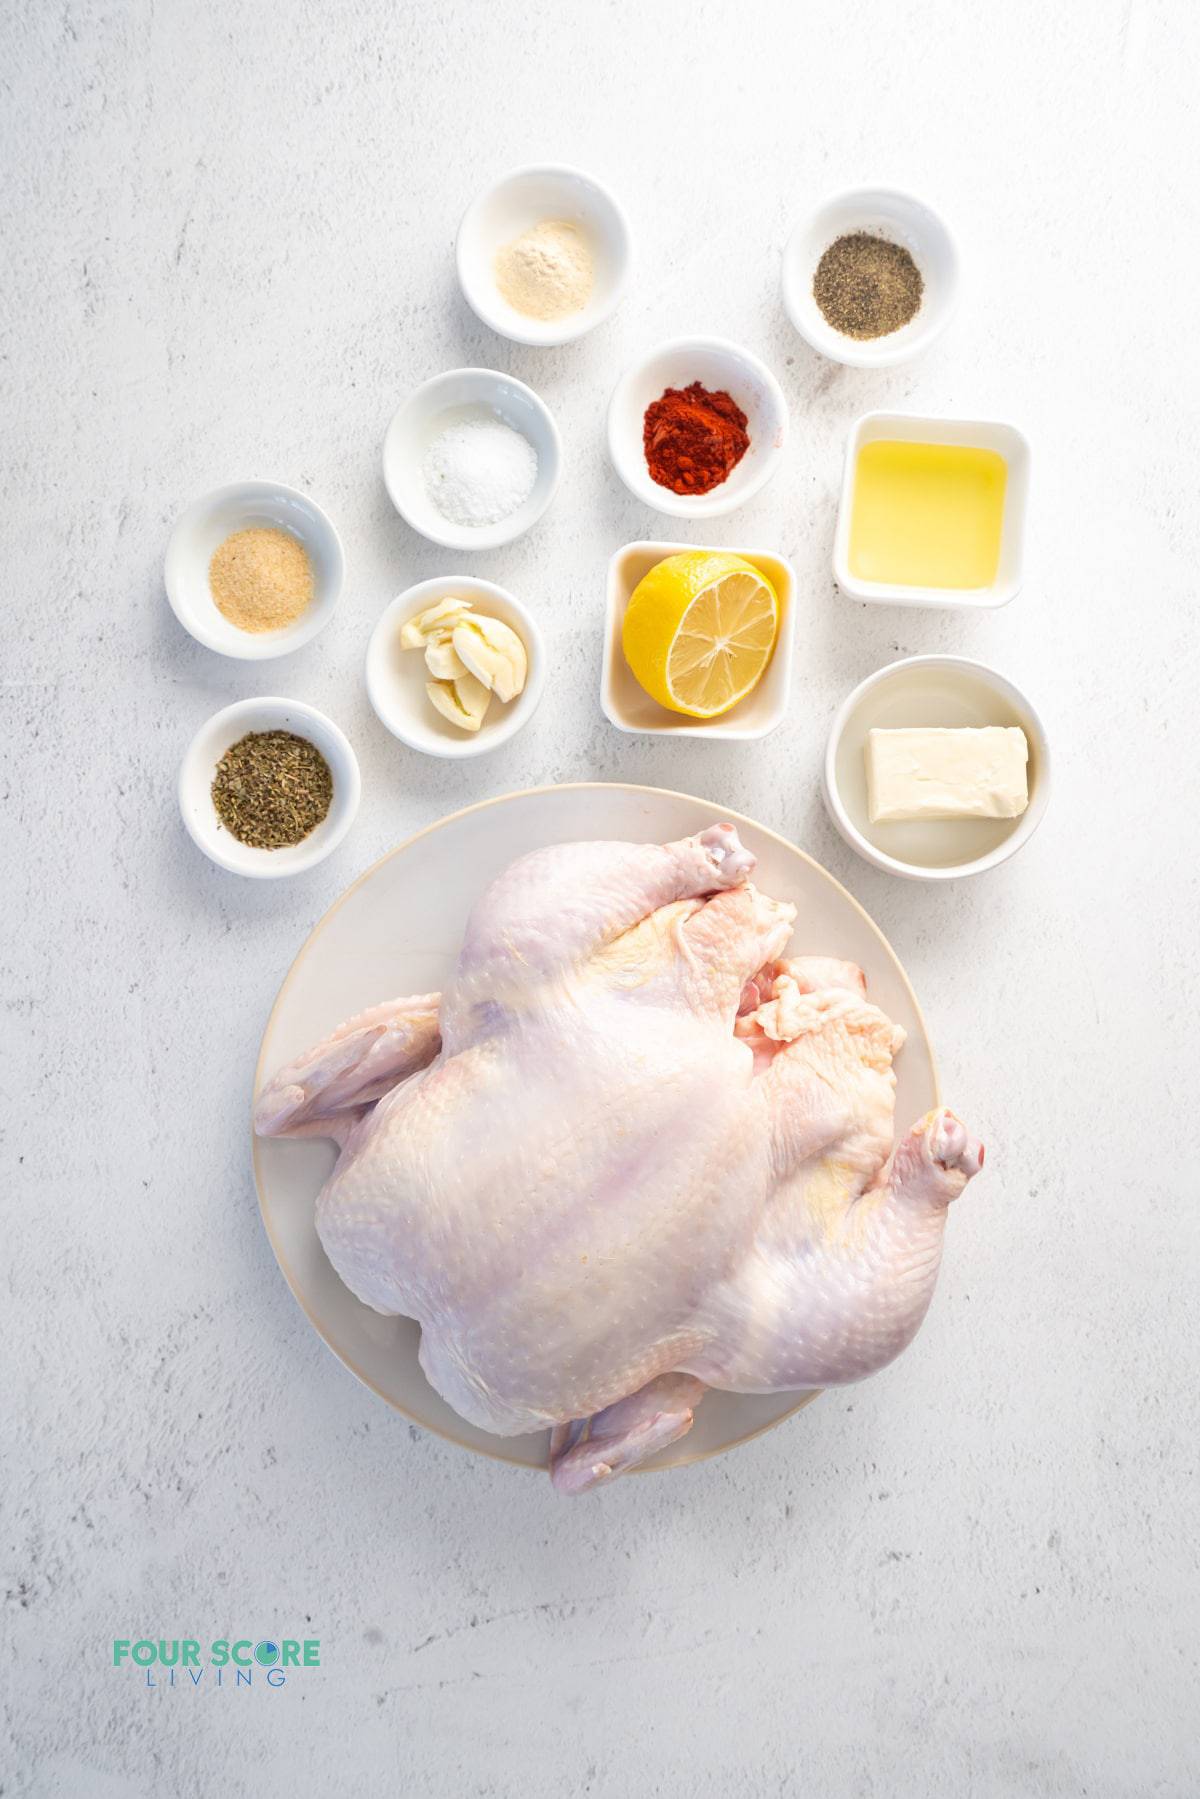 Ingredients for making a whole chicken in the instant pot in separate bowls on a countertop. Includes lemon, butter, garlic, and seasonings